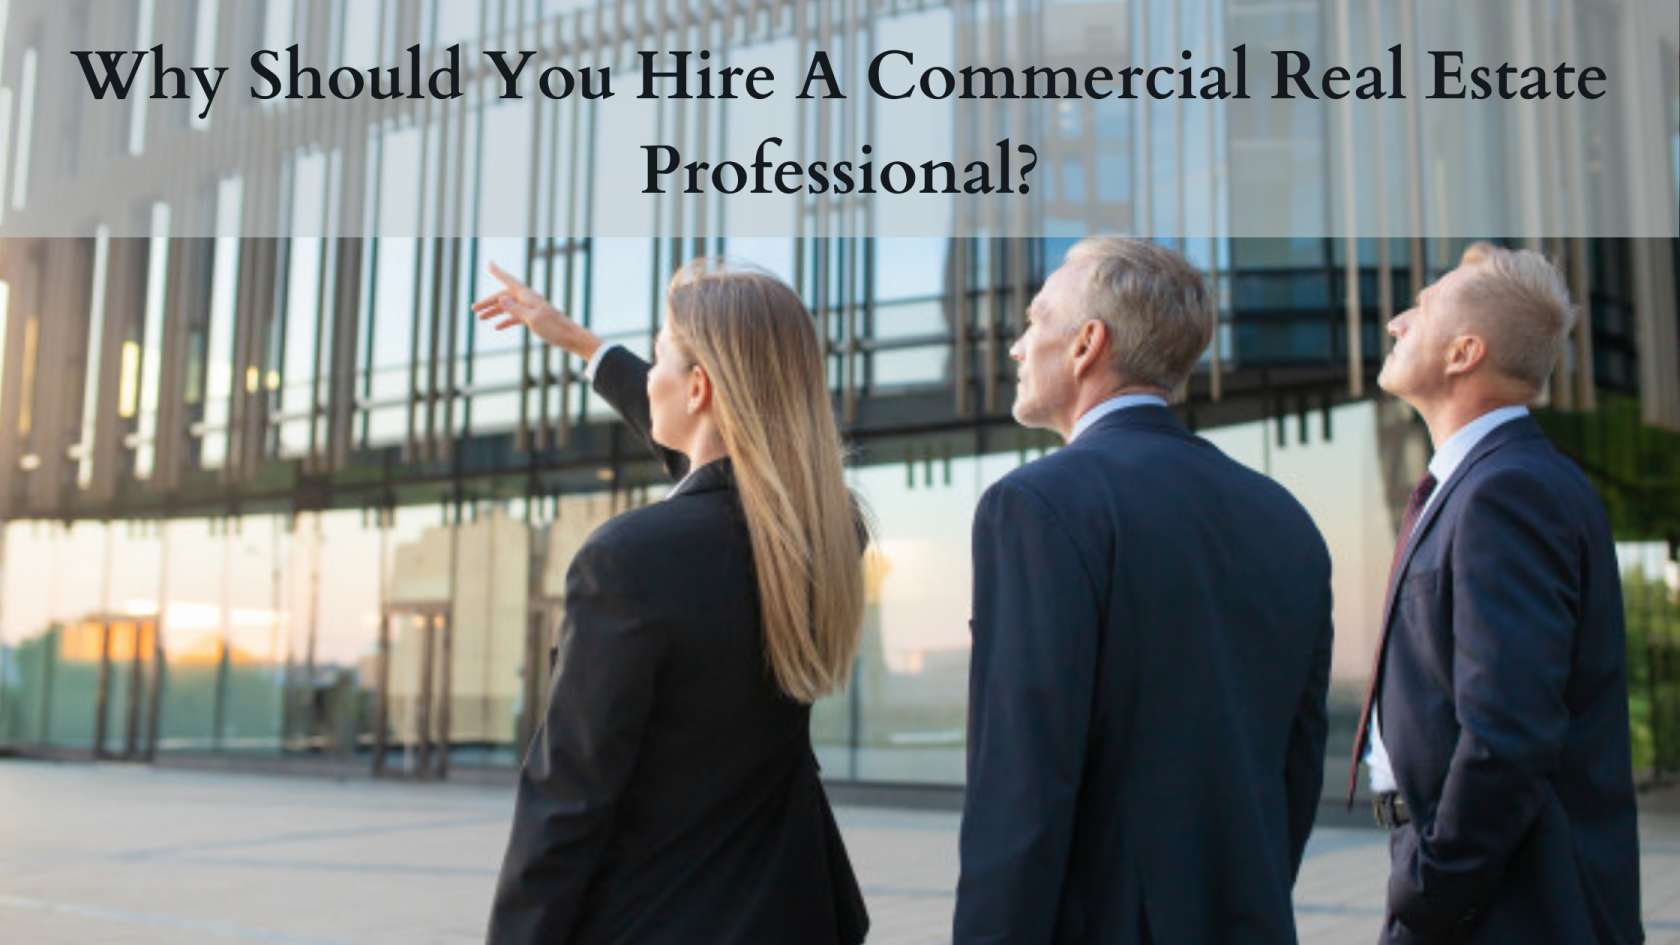 Hire A Commercial Real Estate Professional